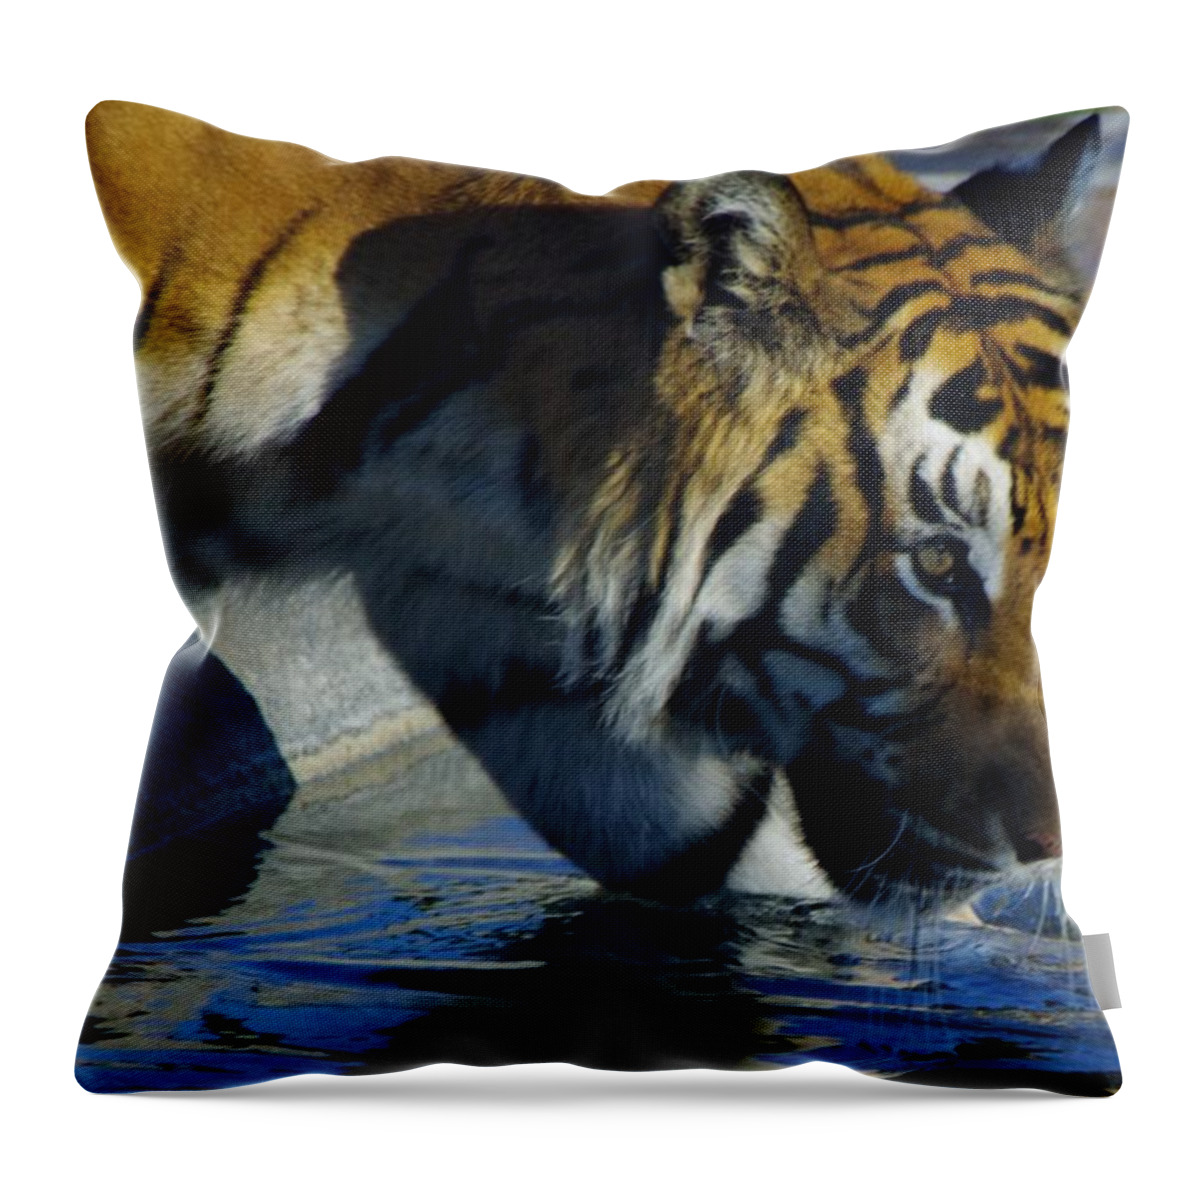 Lions Tigers And Bears Throw Pillow featuring the photograph Tiger 2 by Phyllis Spoor